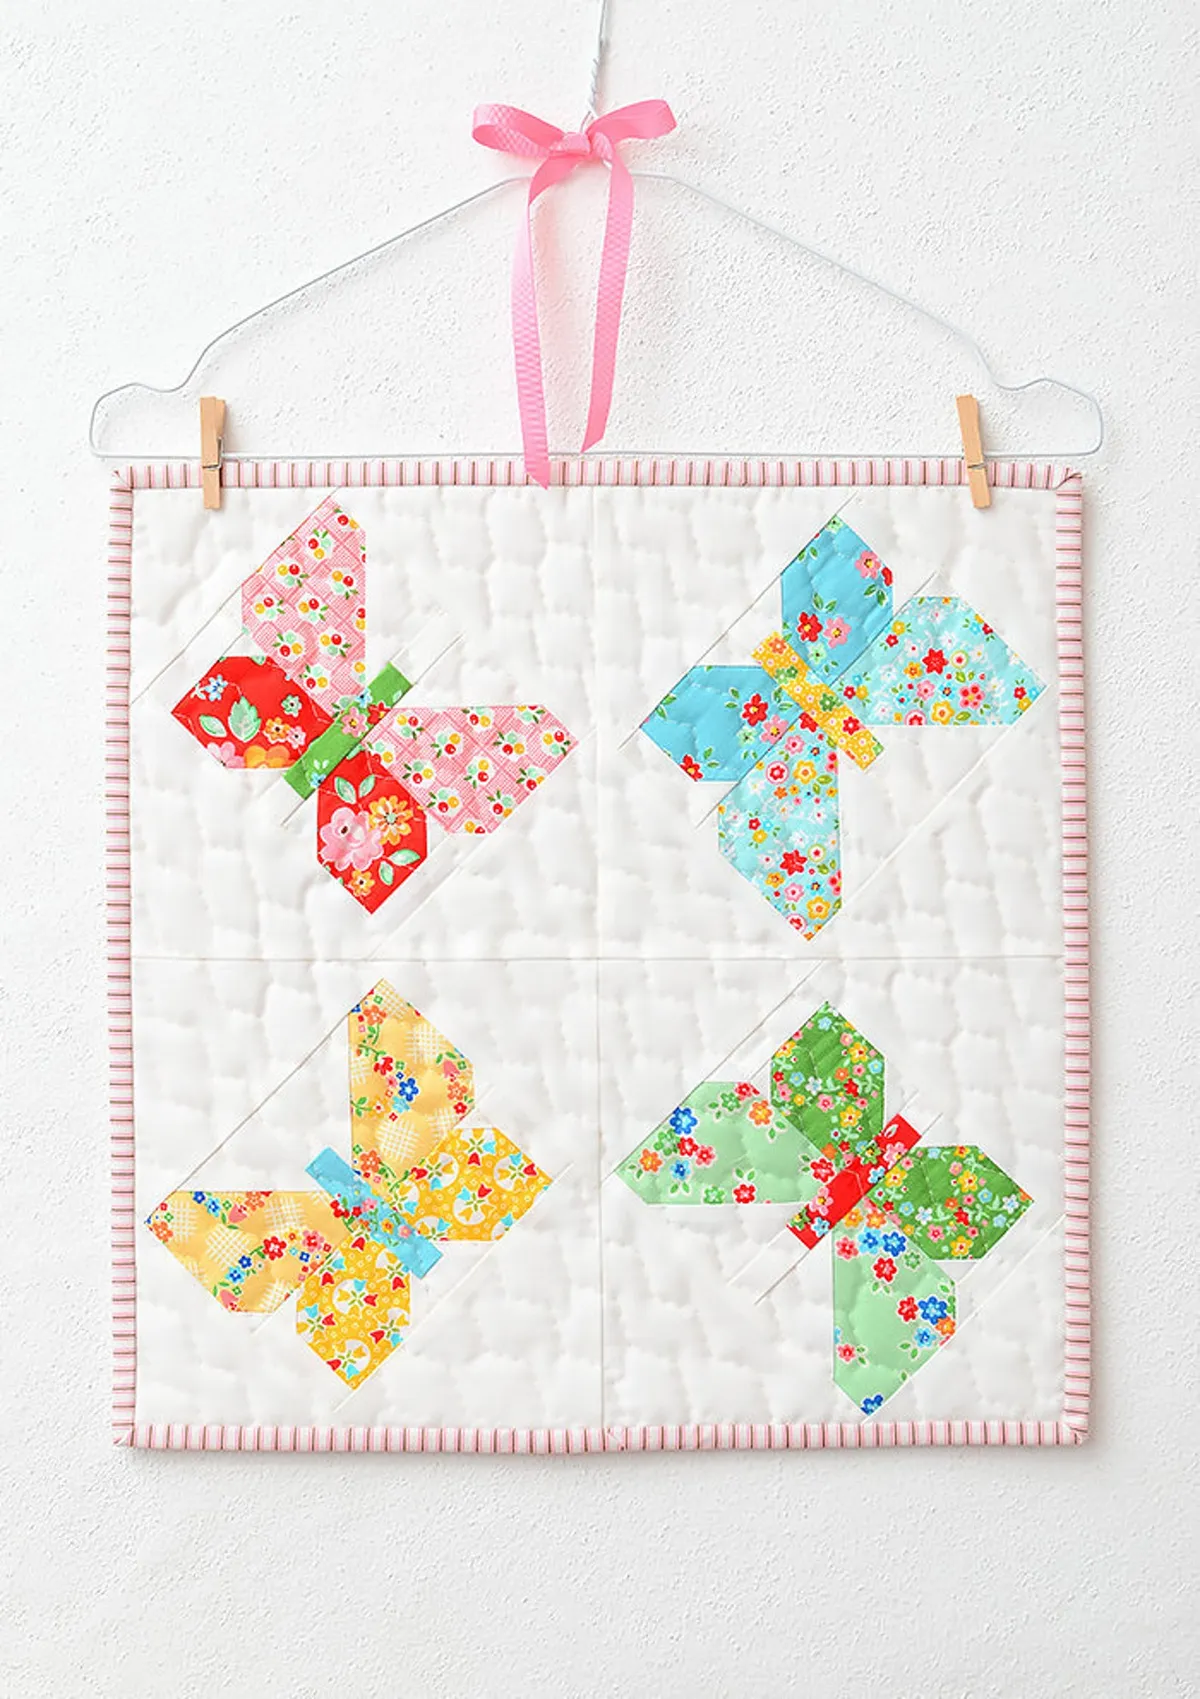 Butterfly quilt pattern